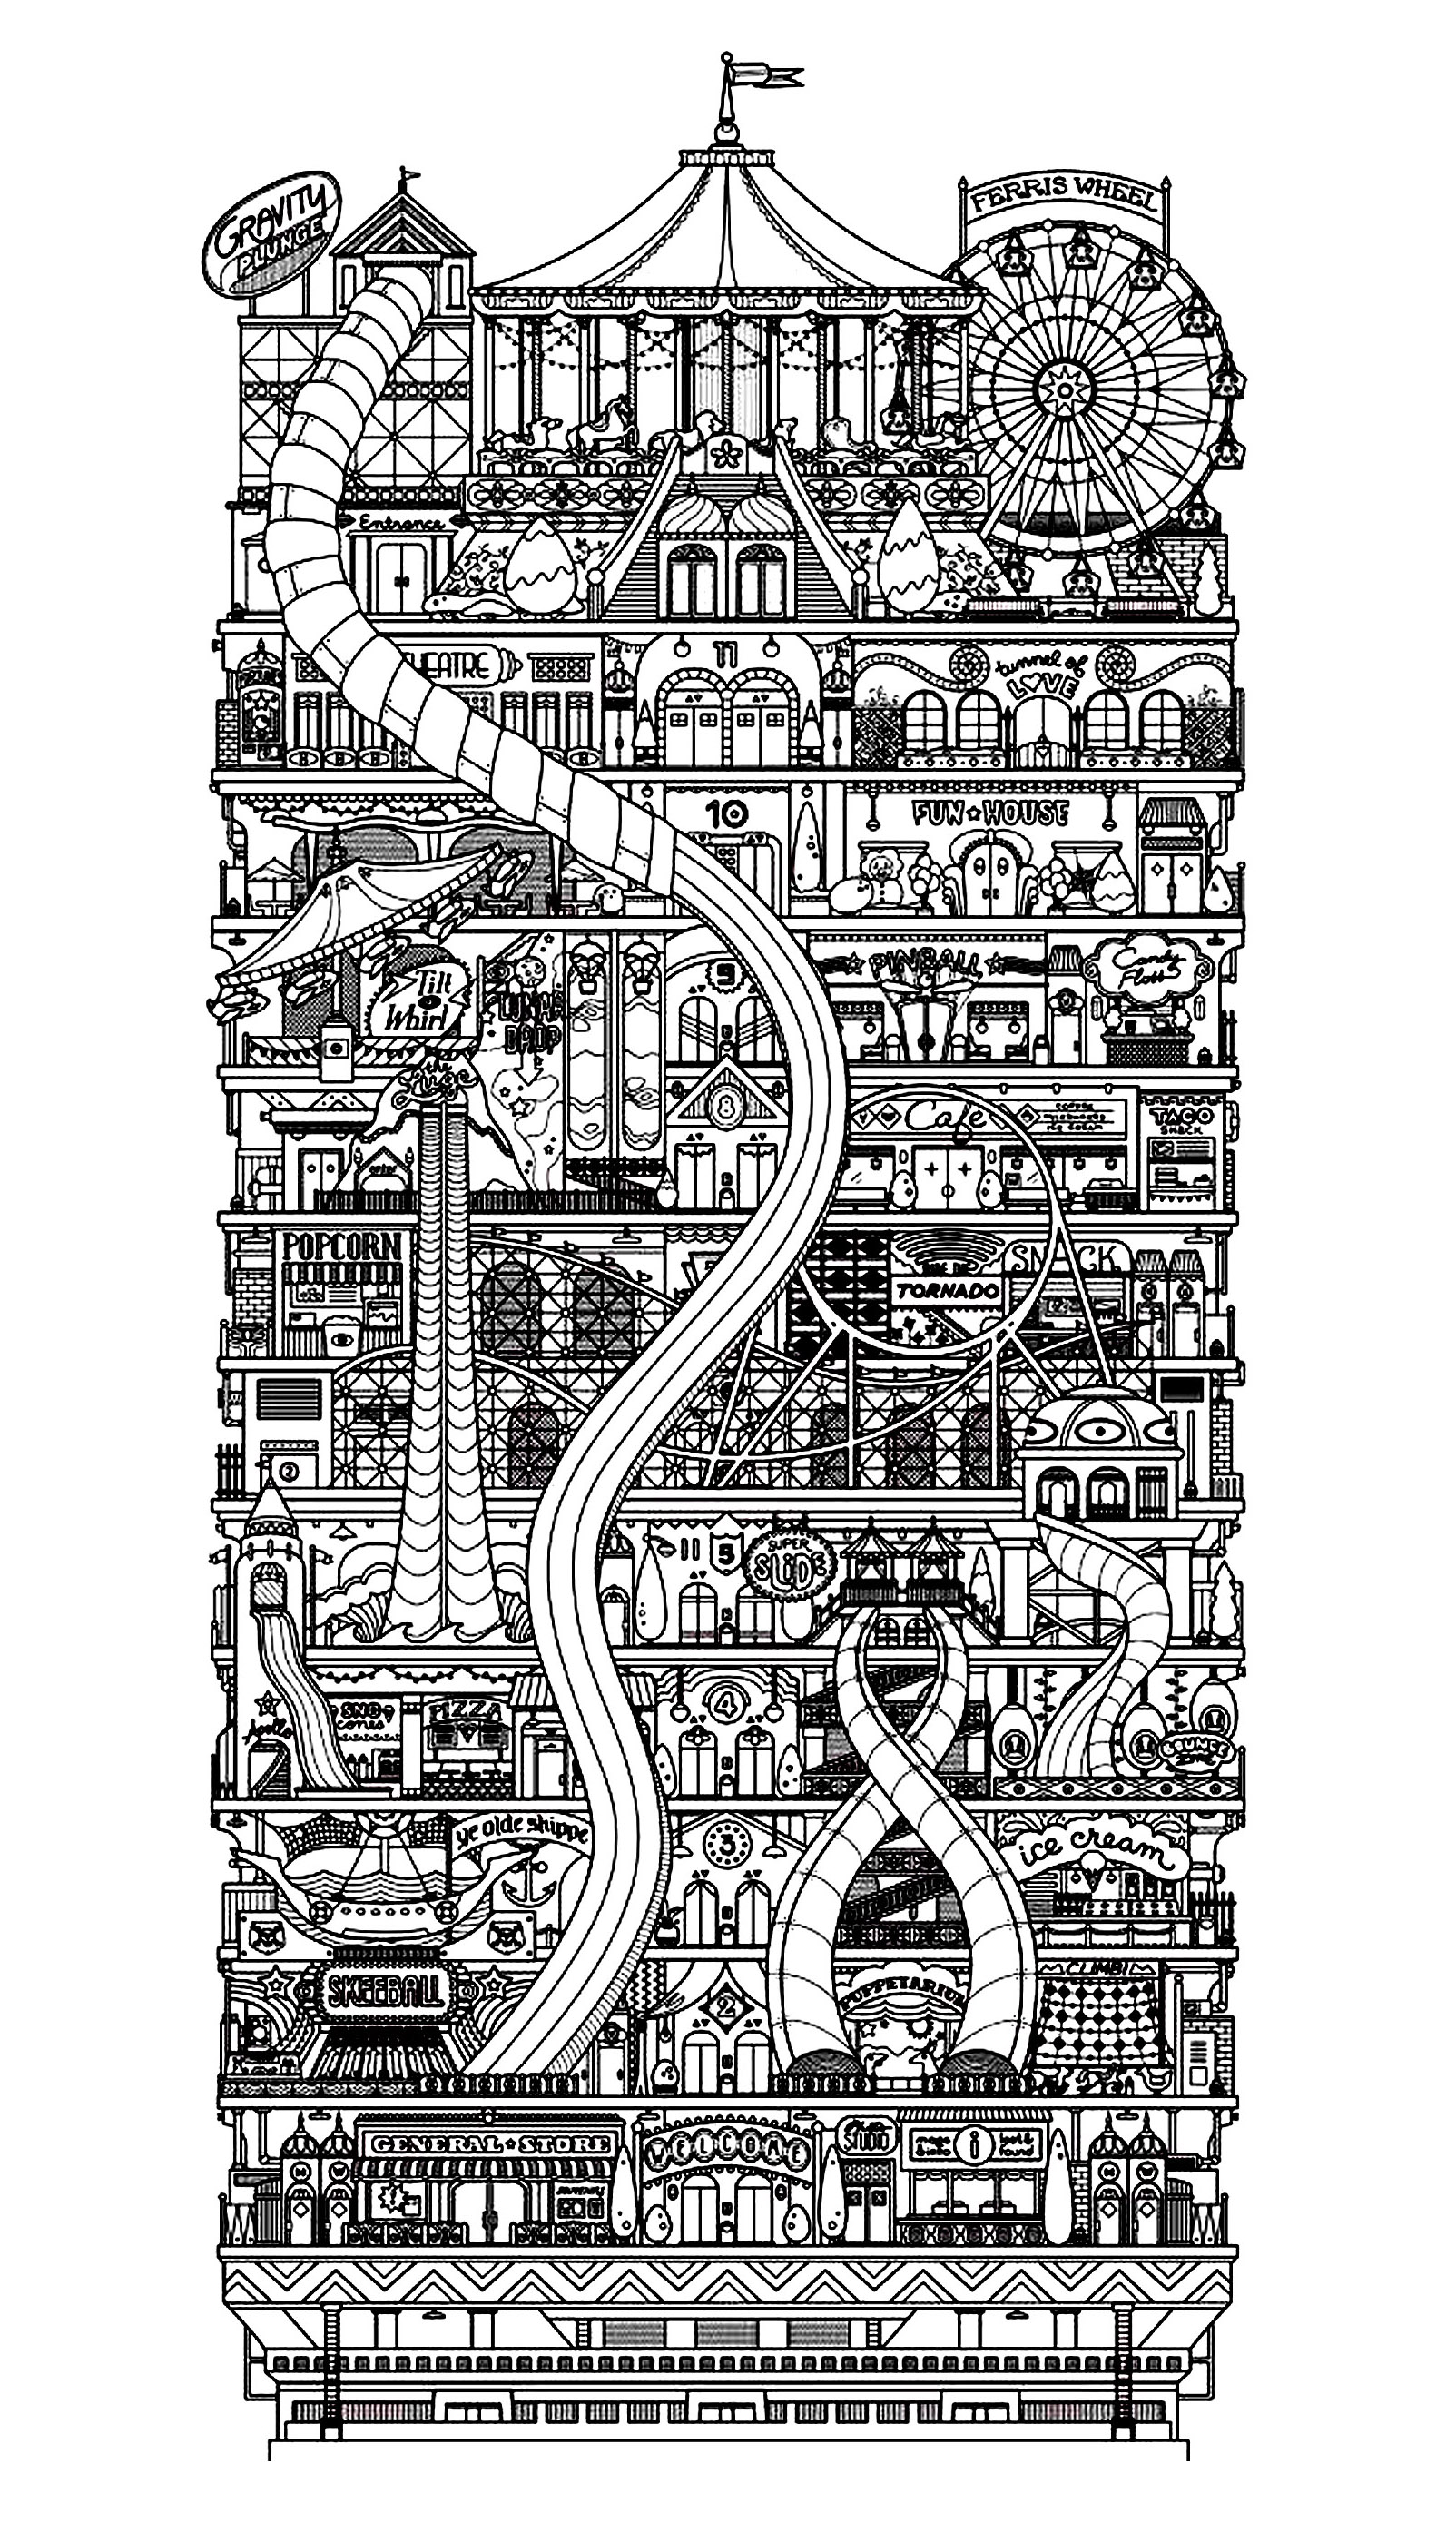 Drawing of a strange and vertical city